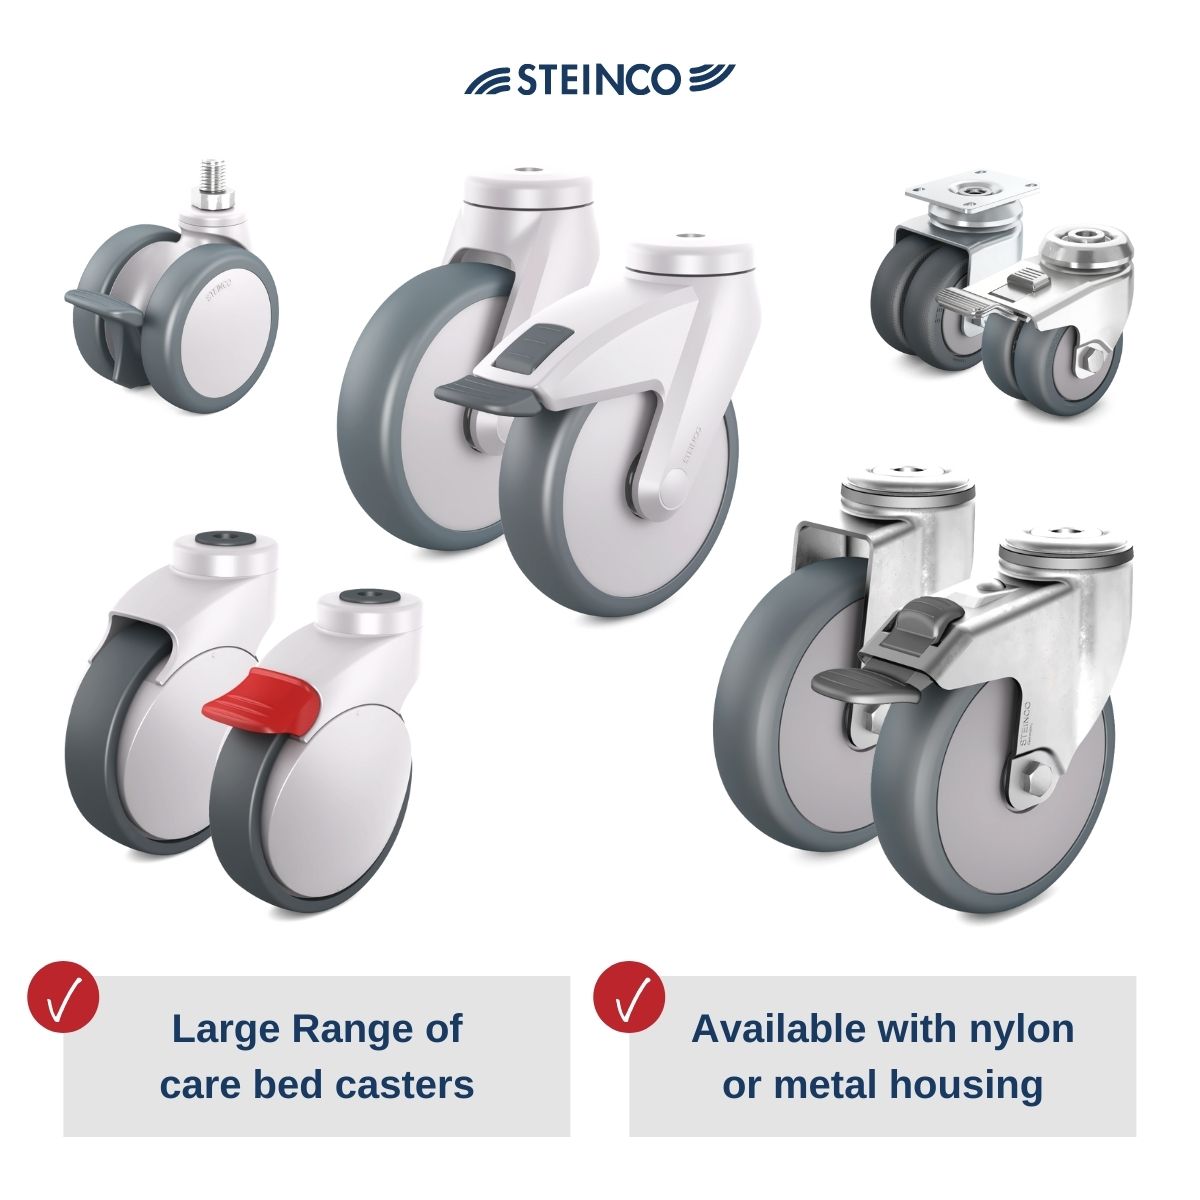 STEINCO casters and wheels for nursing home beds, care beds in hygenic design with brakes